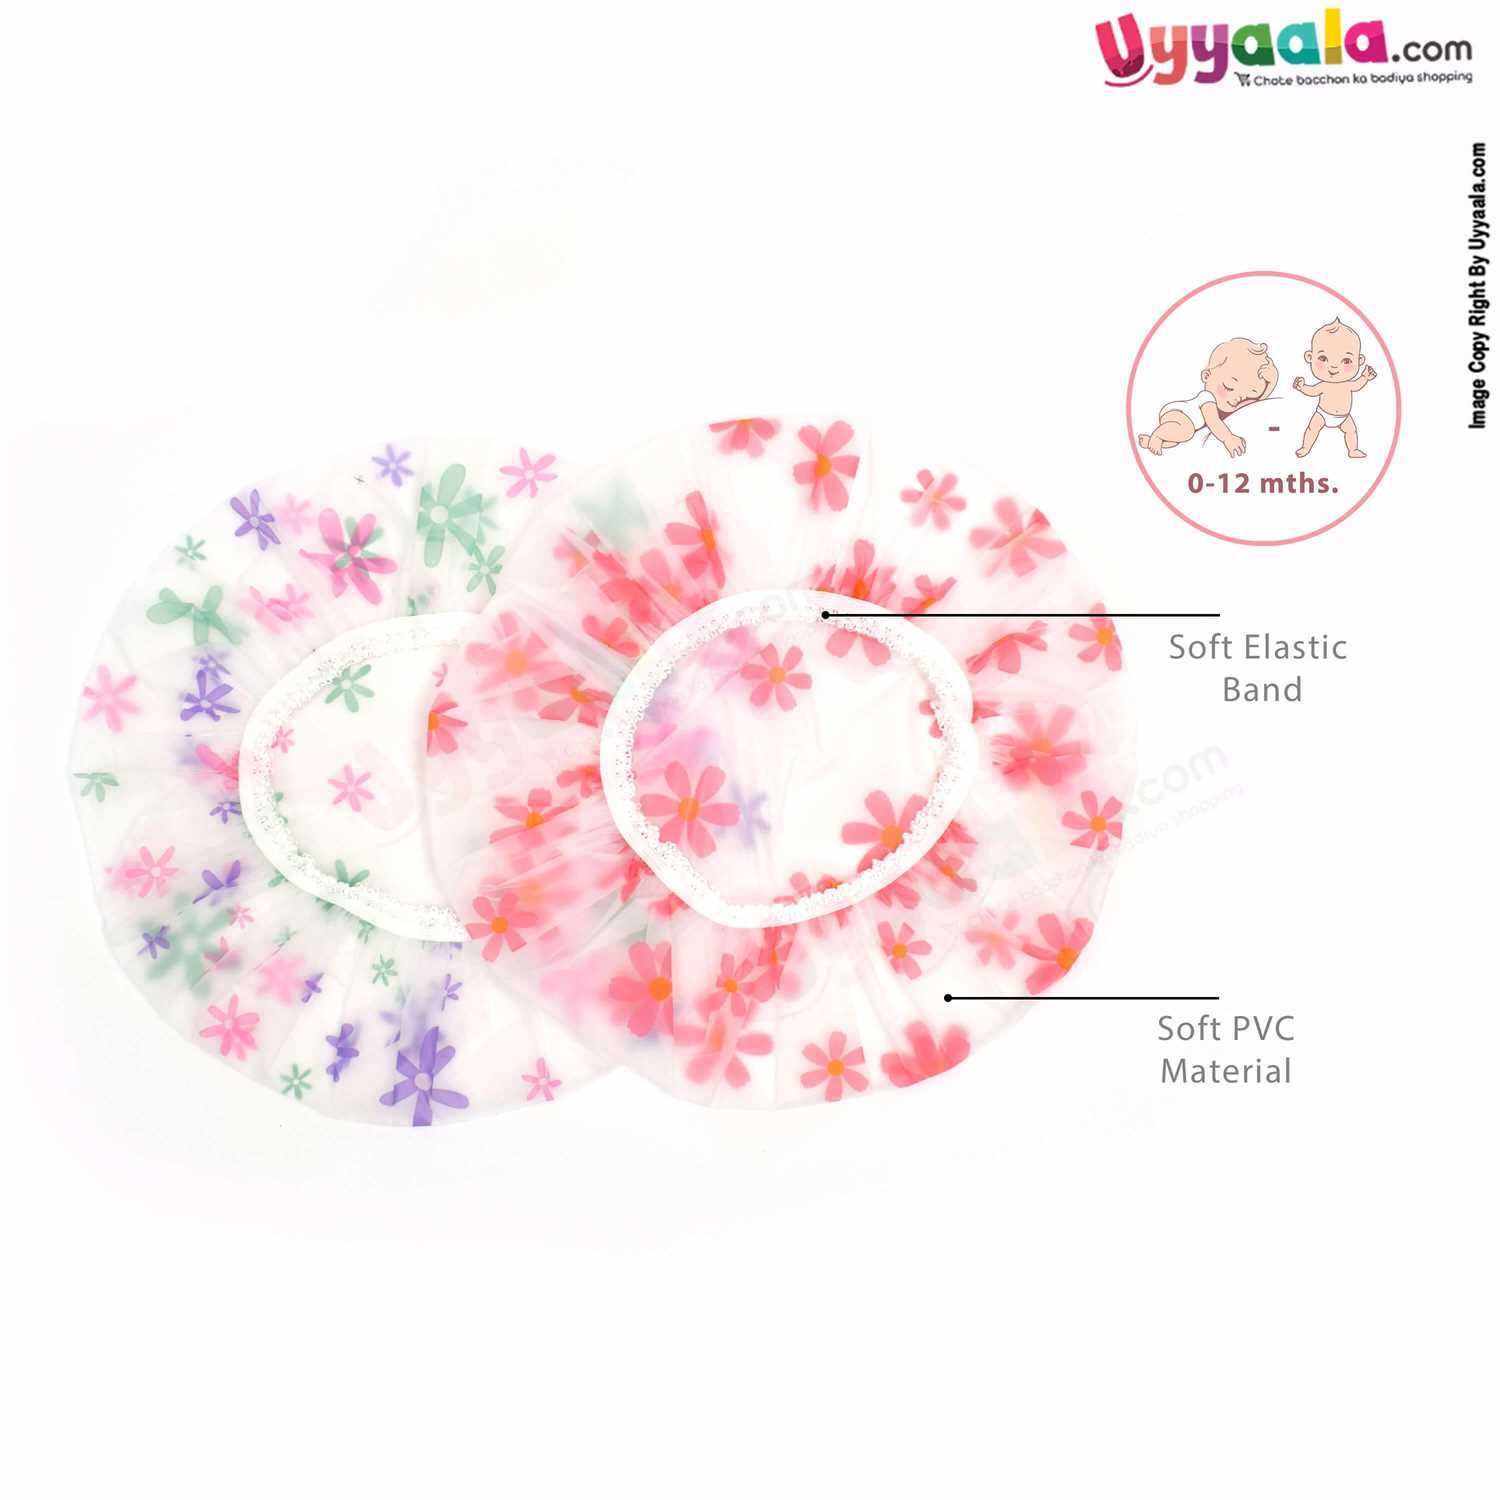 Fashion & Cute Shower Caps for Babies with Floral Print Pack of 2, 0-12m Age - Multi Color